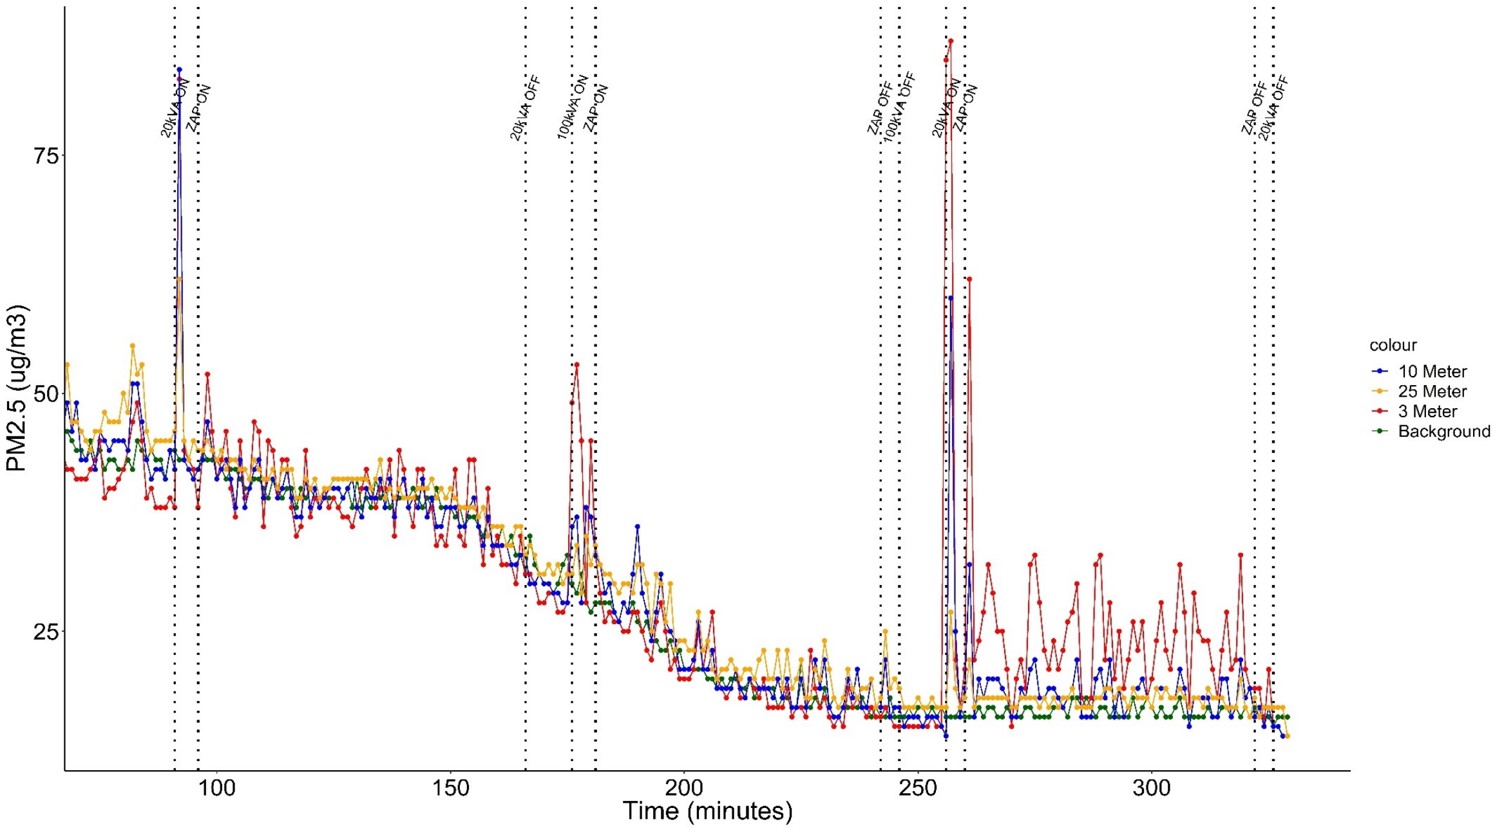 Source: IRAS, Utrecht University. Example of 300-minute PM2.5 emission measurements. For the same sequence of activations/deactivations displayed for UFP measurements, the presence of PM2.5 can be reduced to less than half along 4 hours of sampling. Only in the case of the medium generator operating regime (right side of the graph) there is a clearly differentiated behavior in the emissions measured